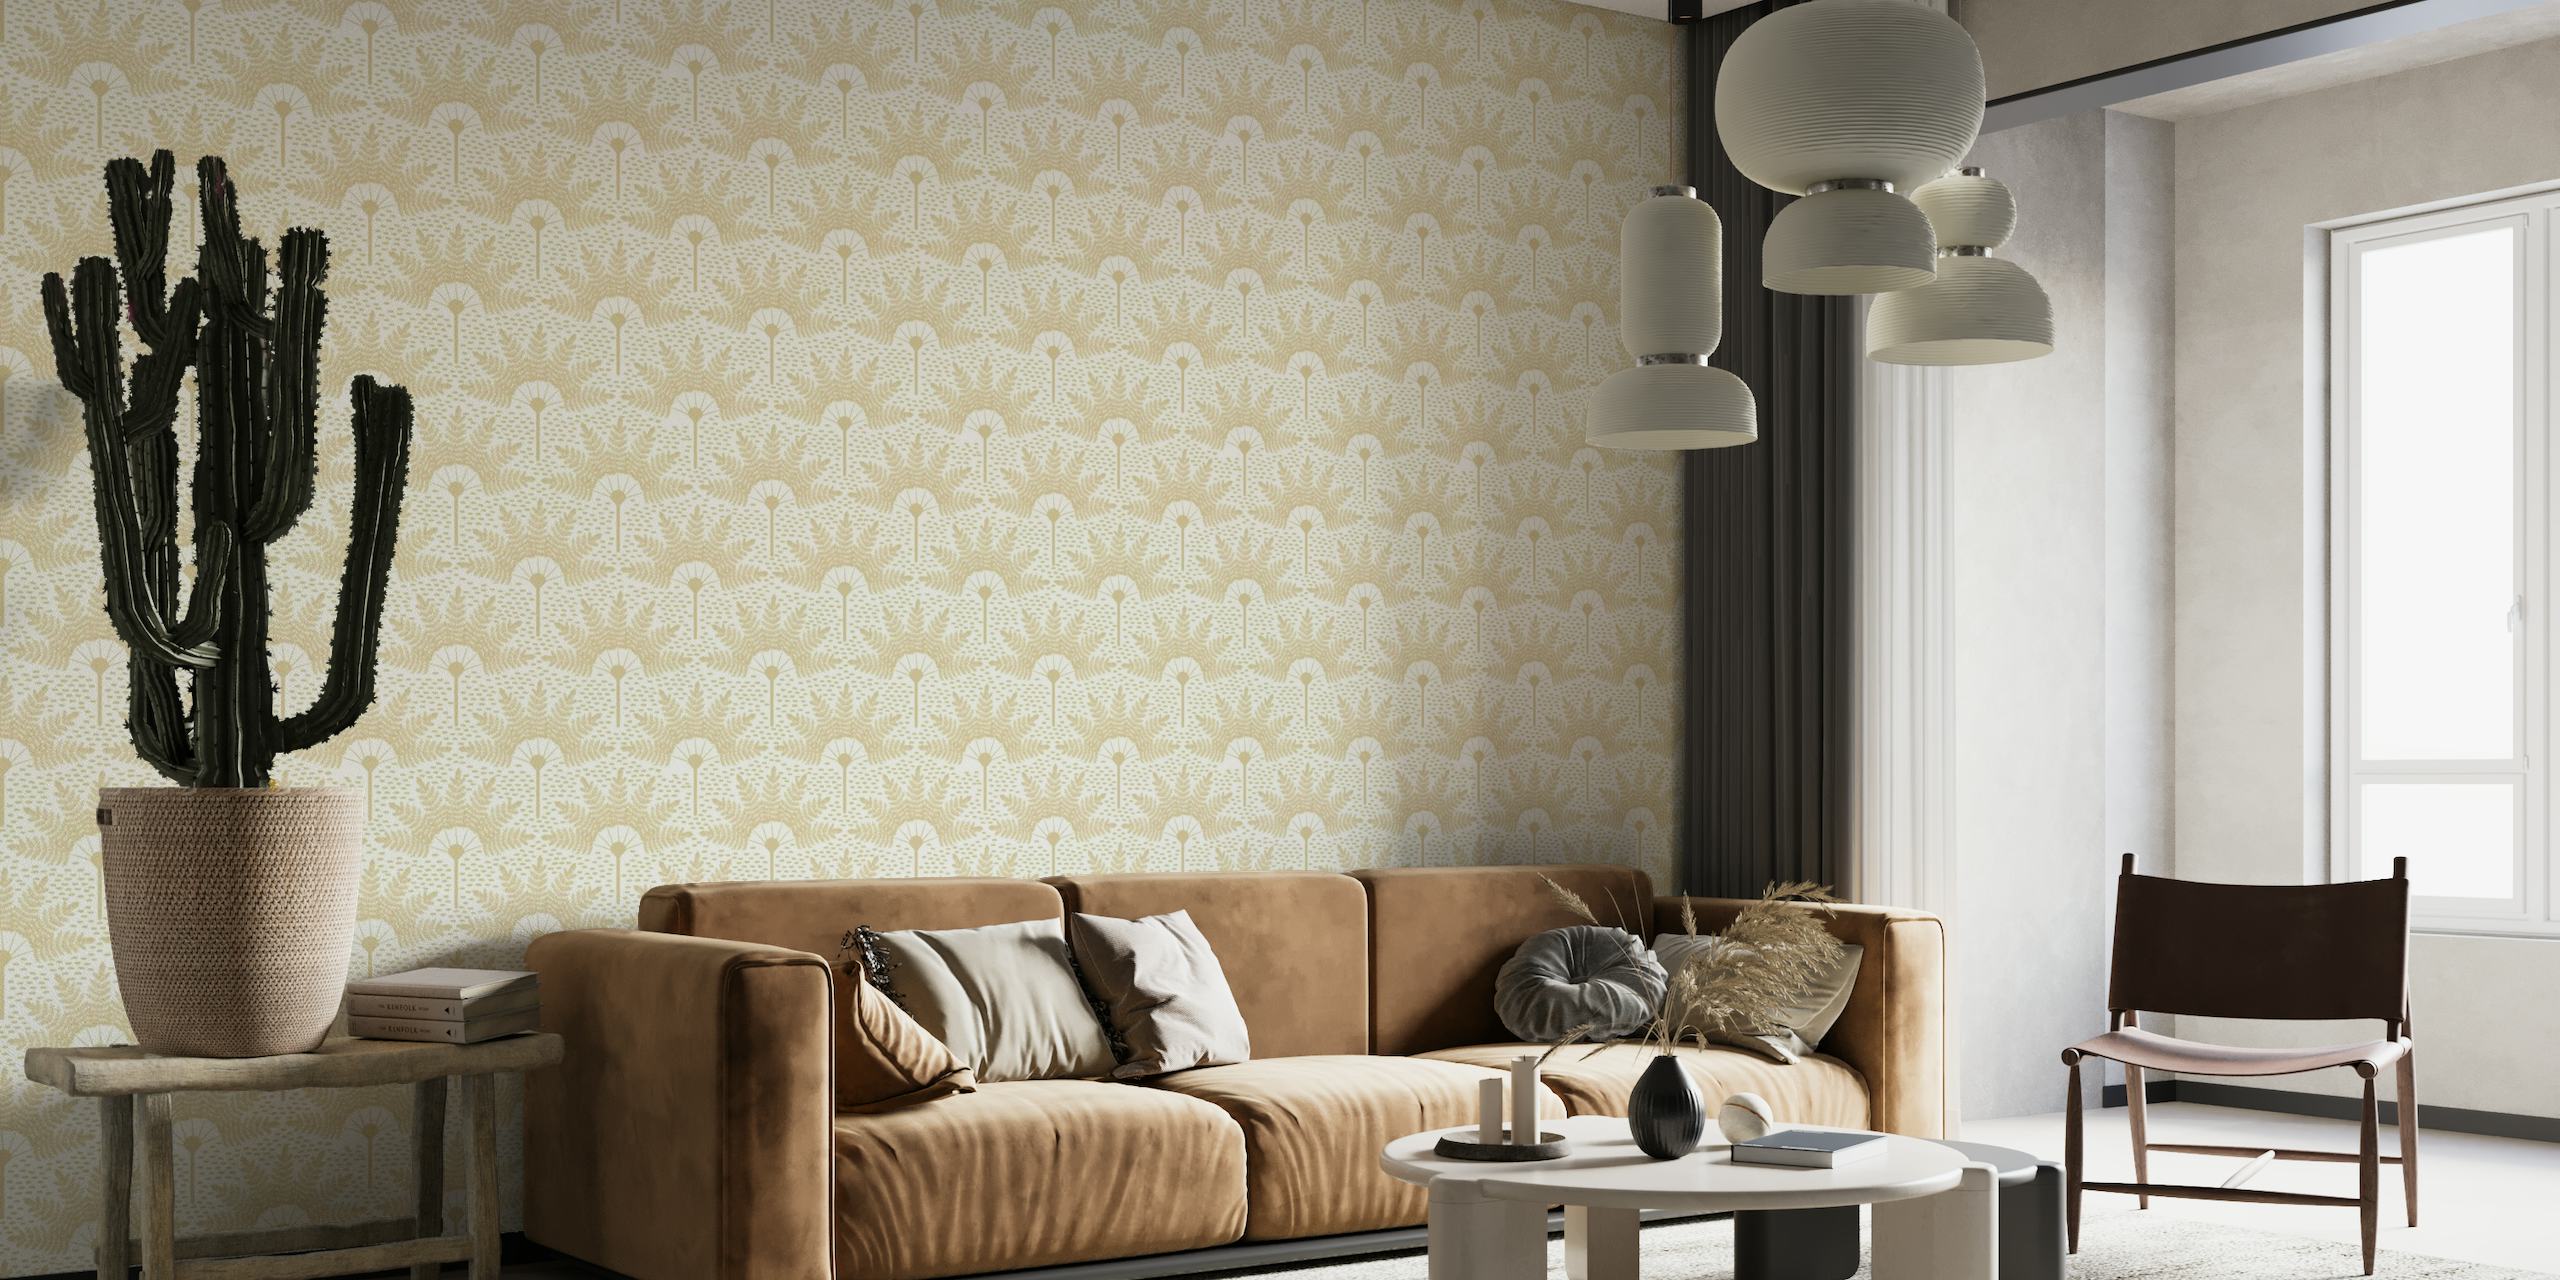 Beige palm pattern wall mural with a modern and minimalistic design